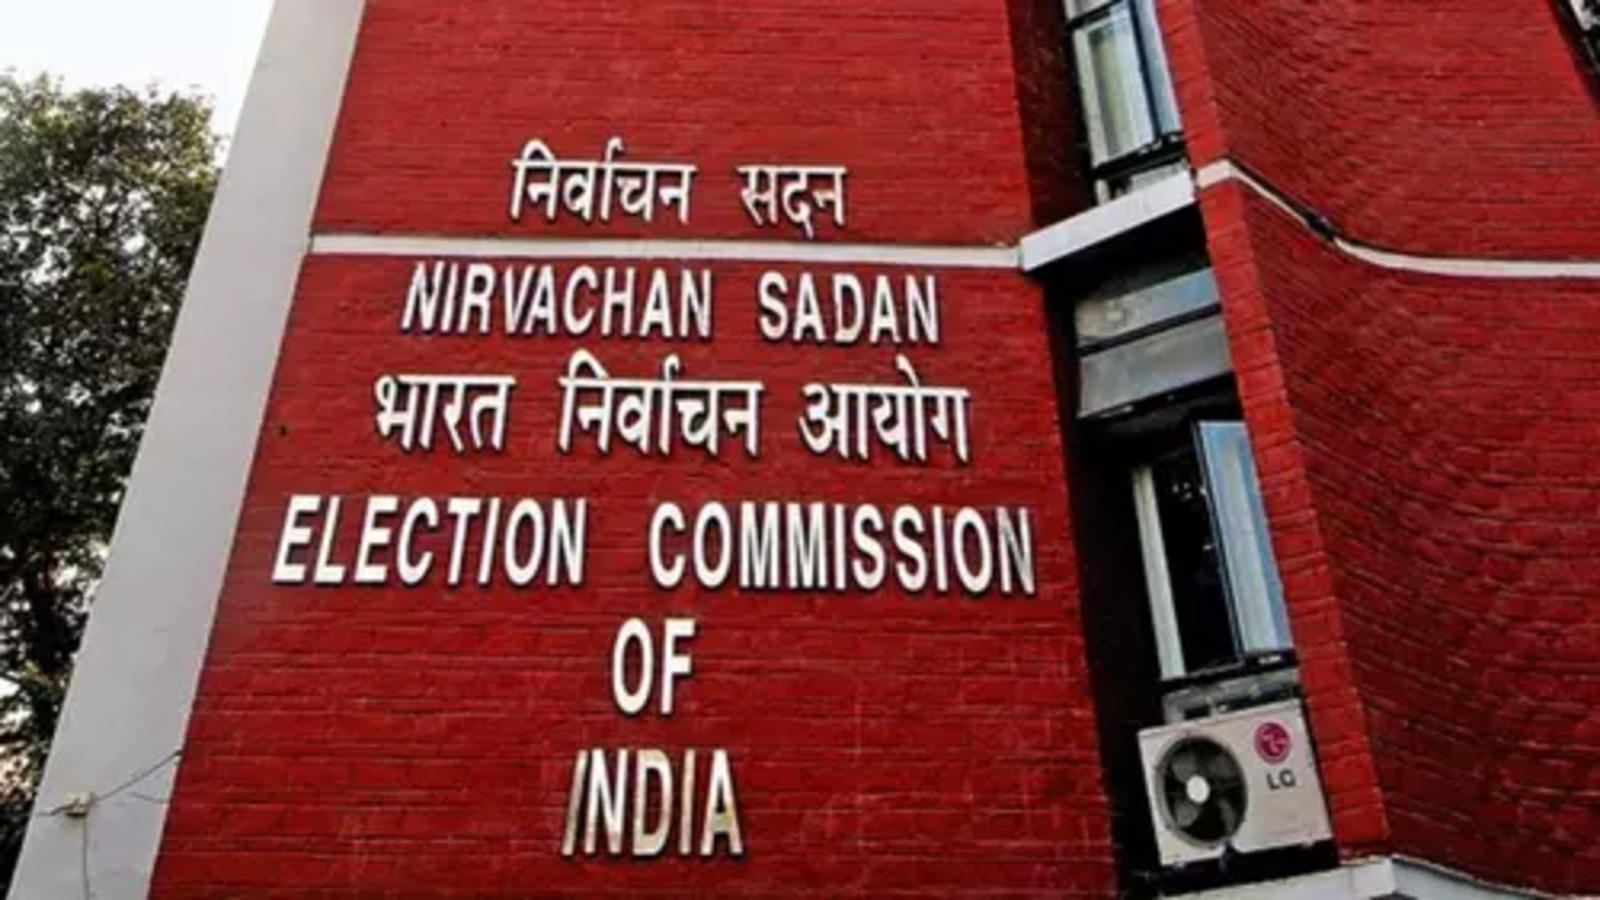 ECI directs responsible and ethical use of social media platforms by political parties and their representatives